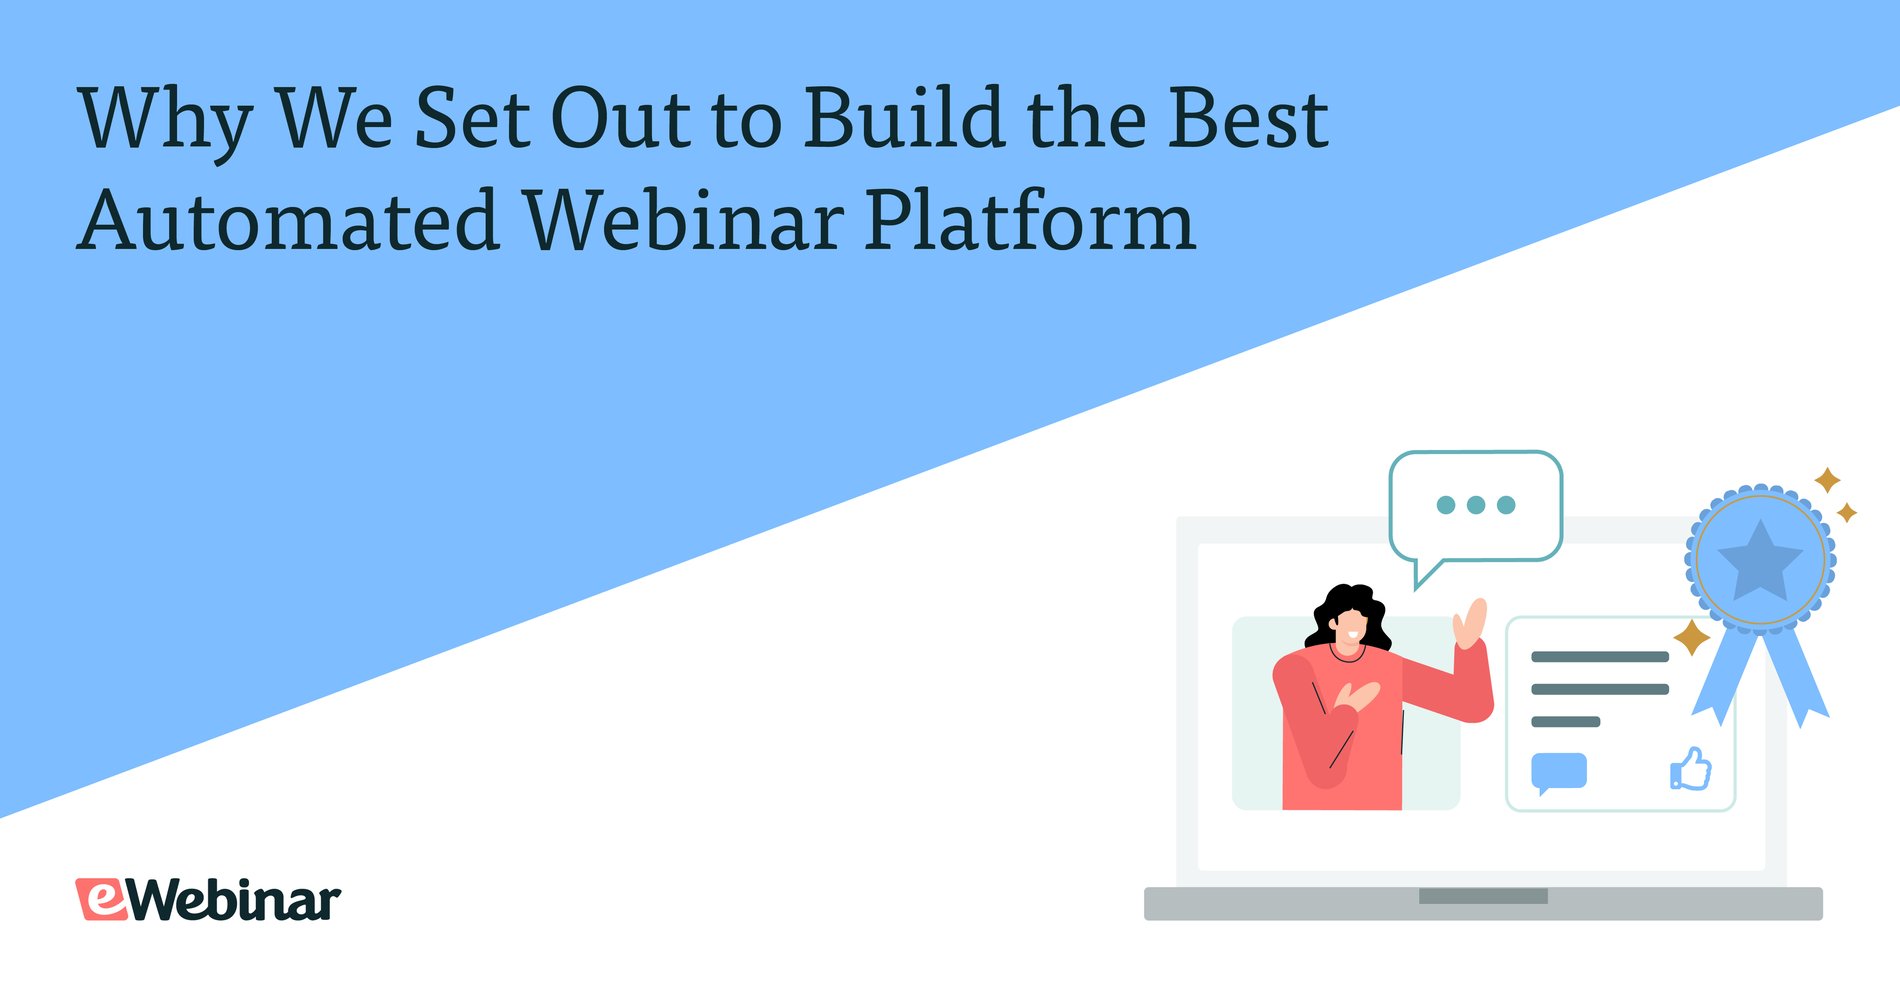 Why We Set Out to Build the Best Automated Webinar Platform